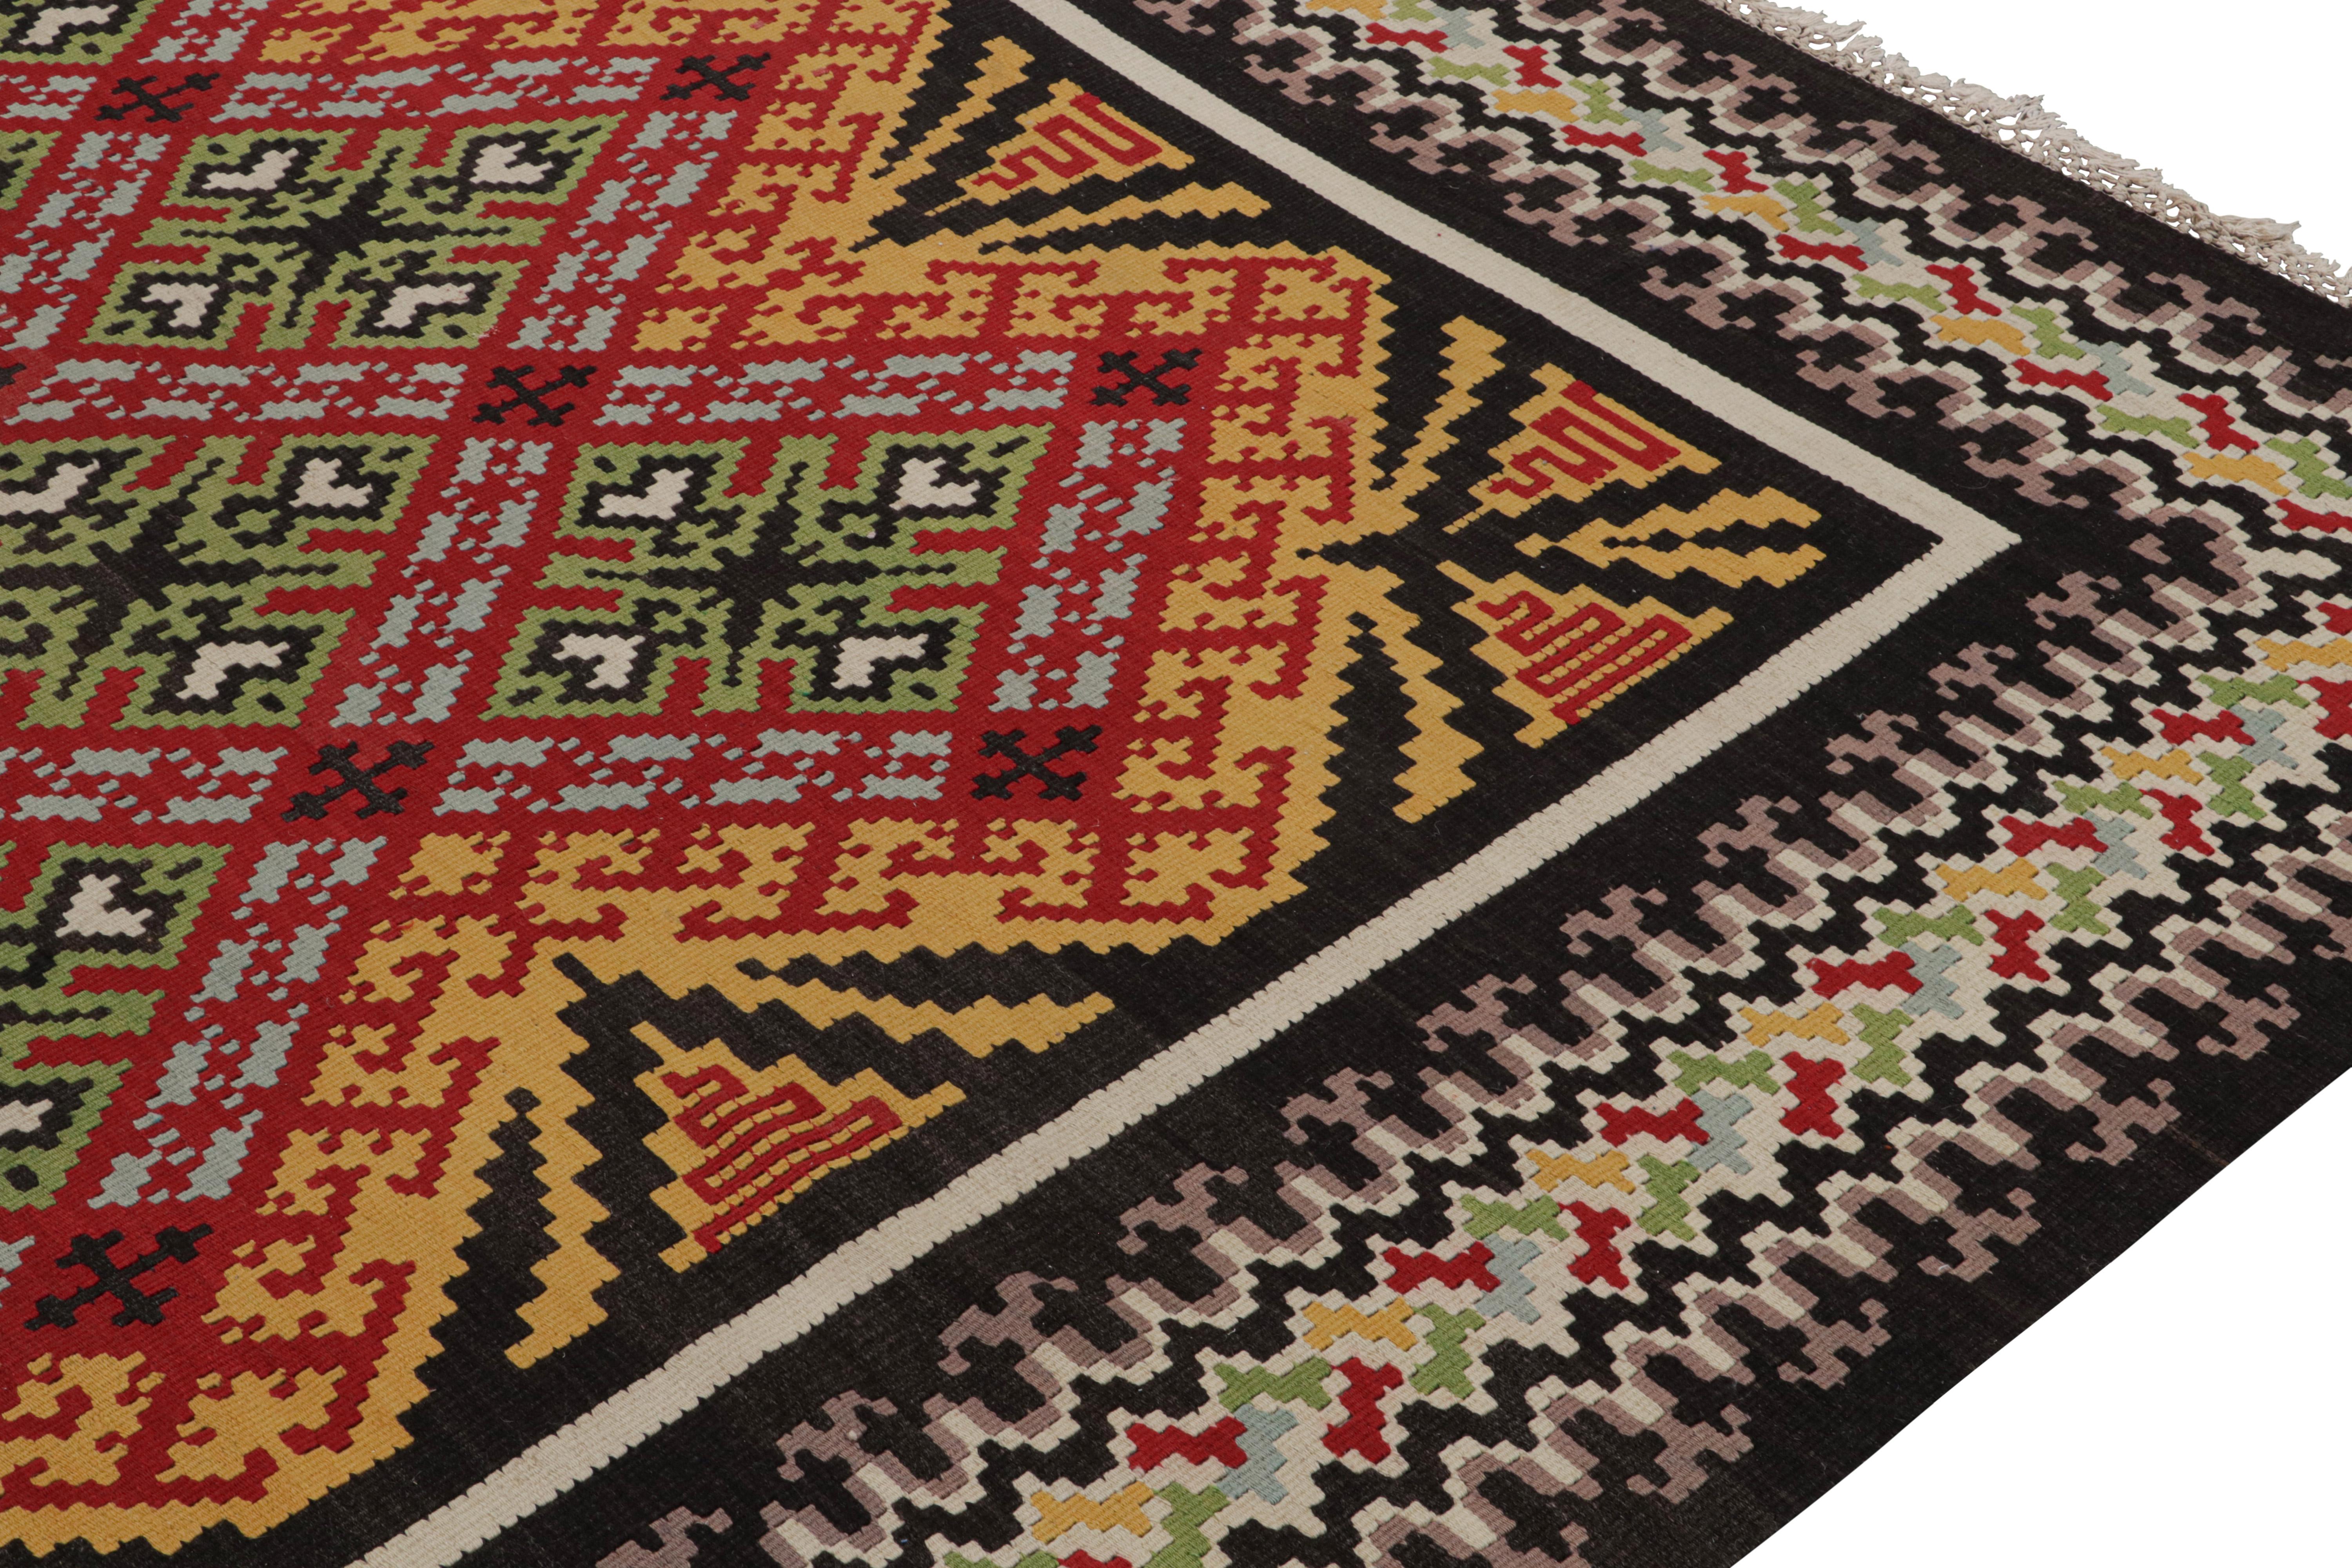 Hand-Woven Vintage Balkan Kilim with Gold, Red & Green Geometric Patterns from Rug & Kilim For Sale